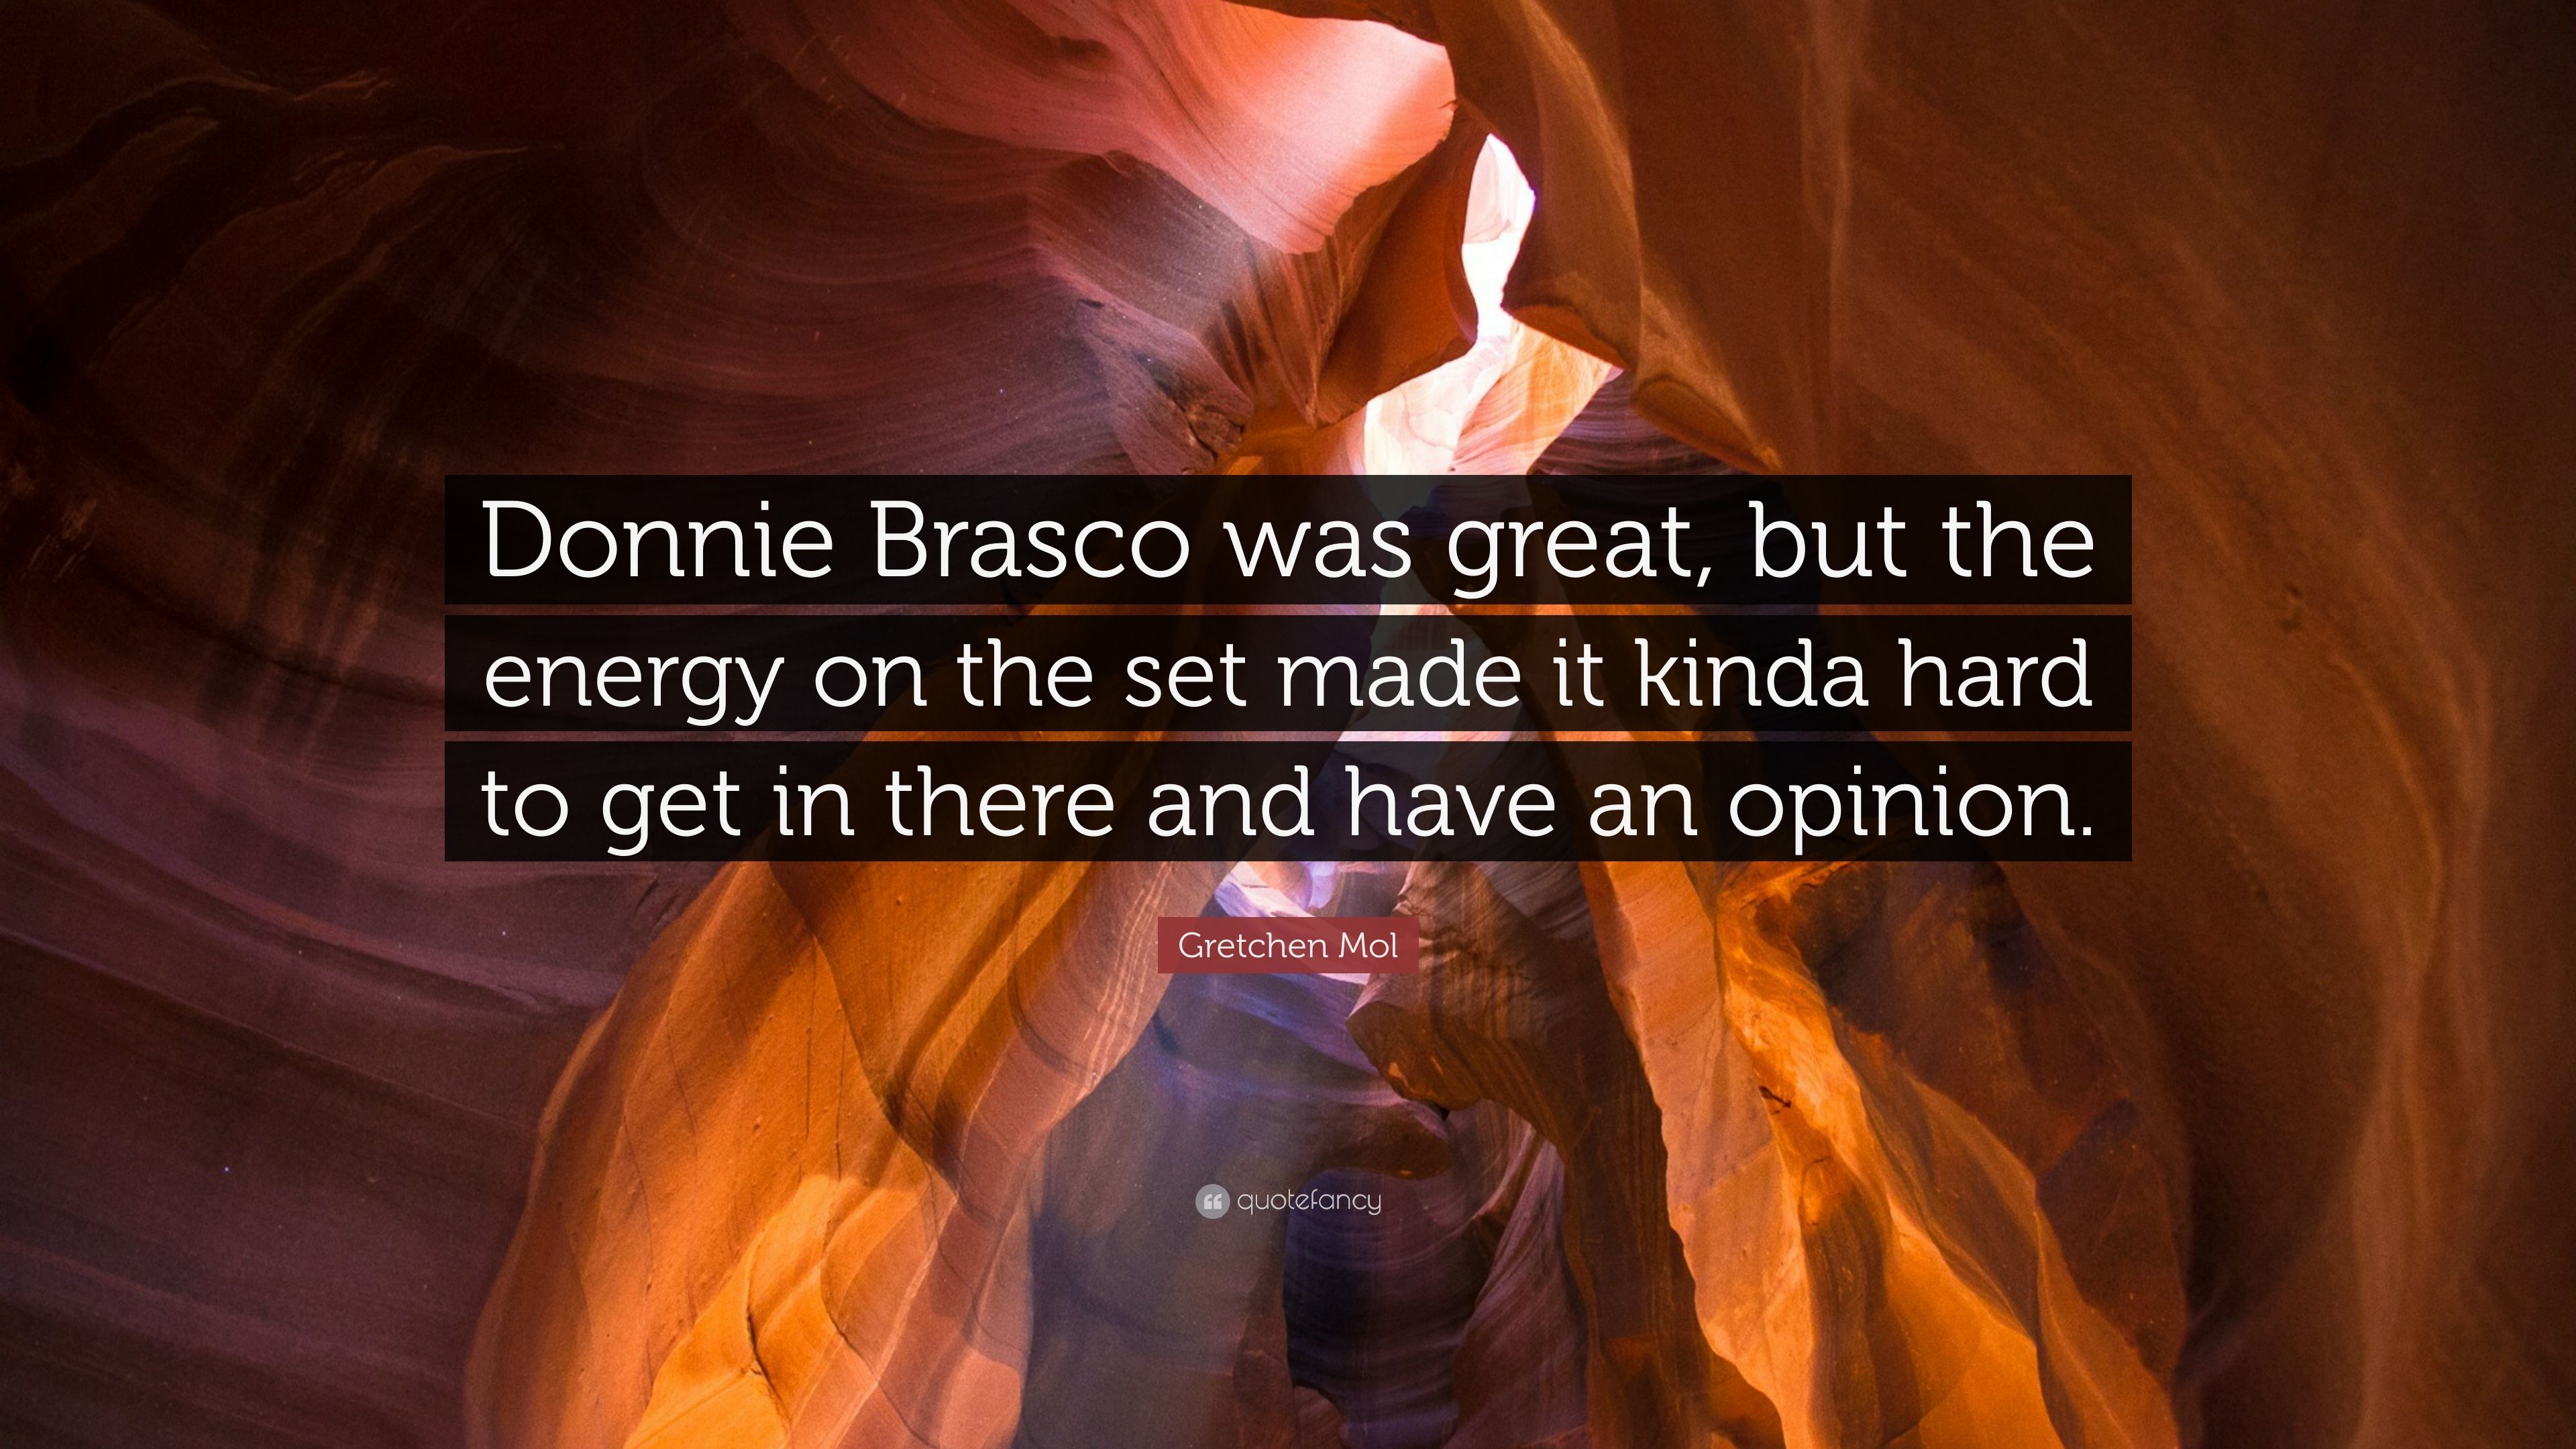 Gretchen Mol Quote: “Donnie Brasco was great, but the energy